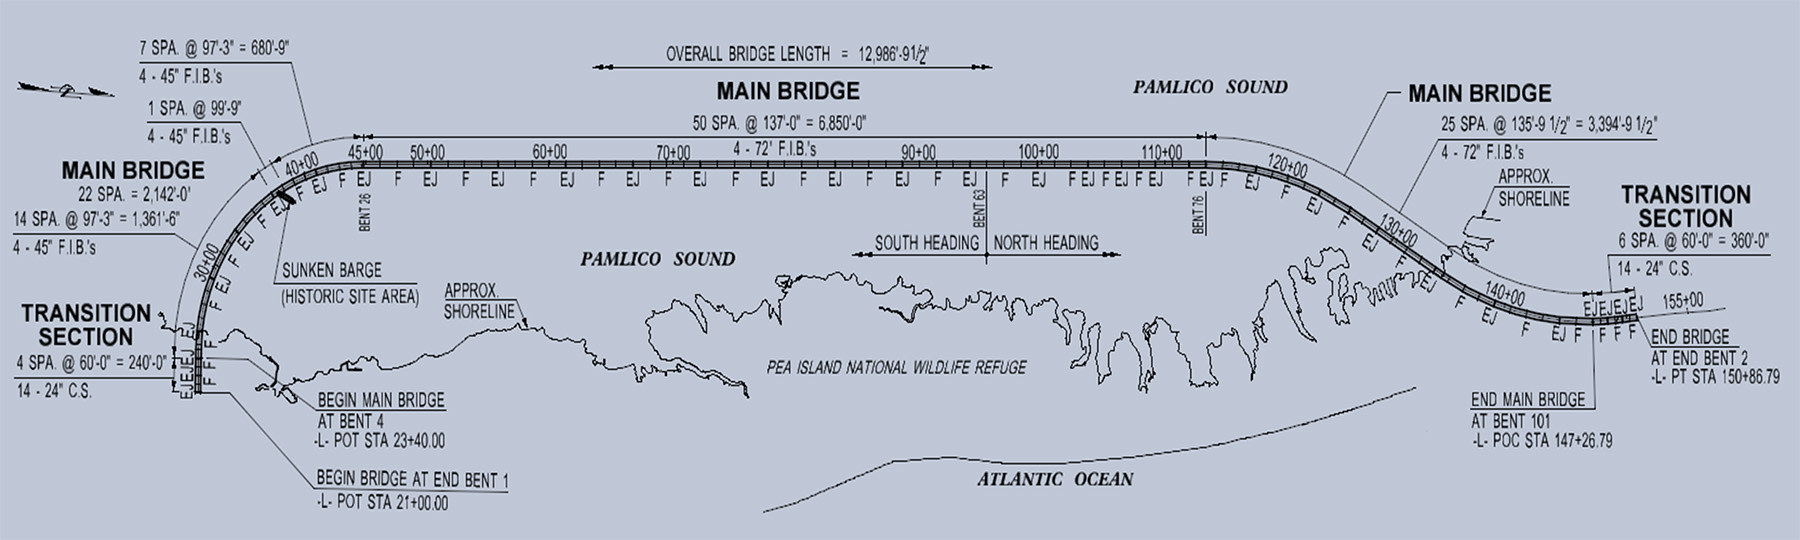 Map shows the setting of a bridge between the Atlantic Ocean and the Pamlico Sound. 